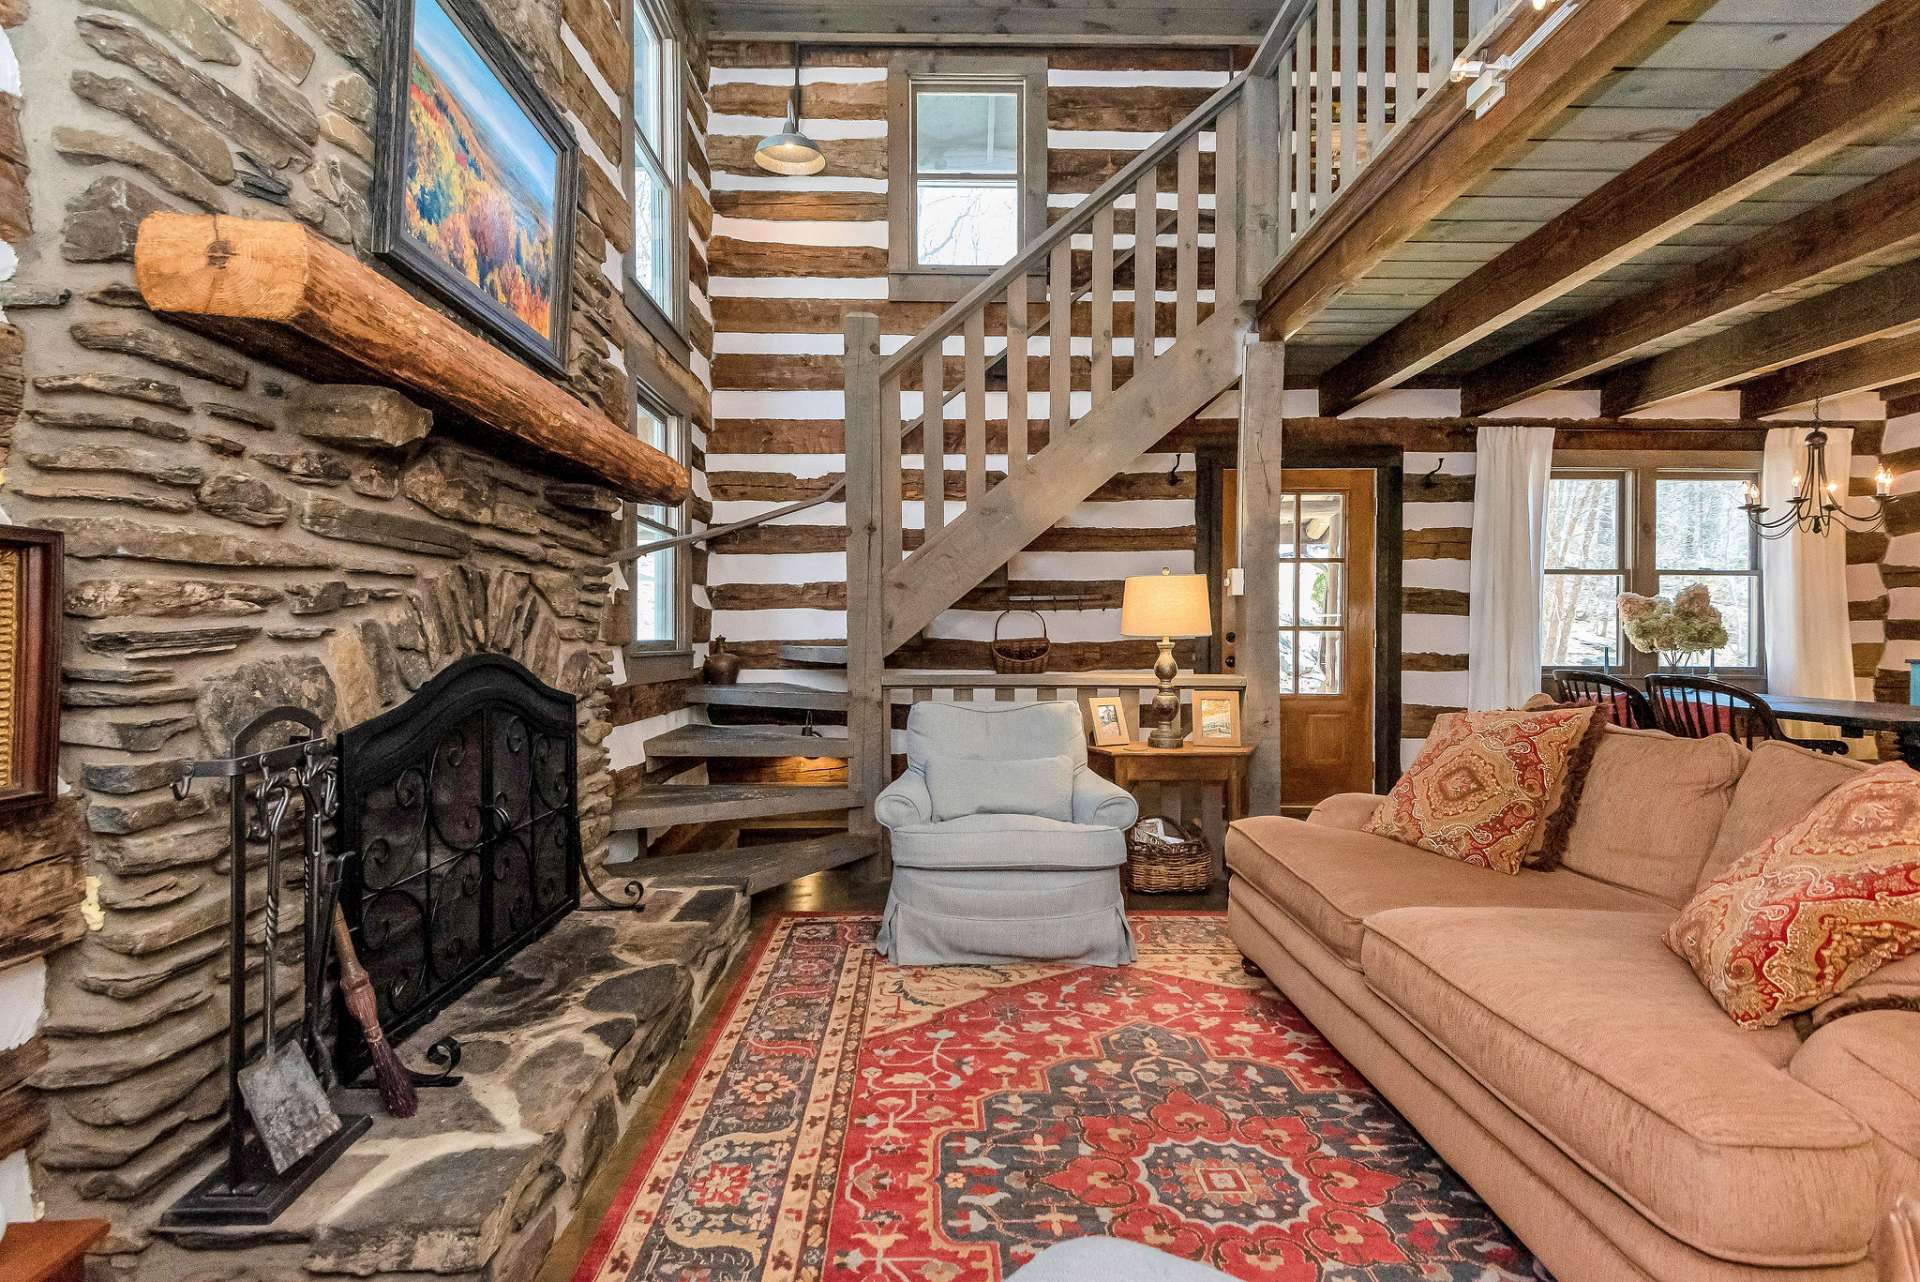 A rustic stairway crafted from natural wood leads to the open loft above, adding an element of whimsy and adventure to the space.